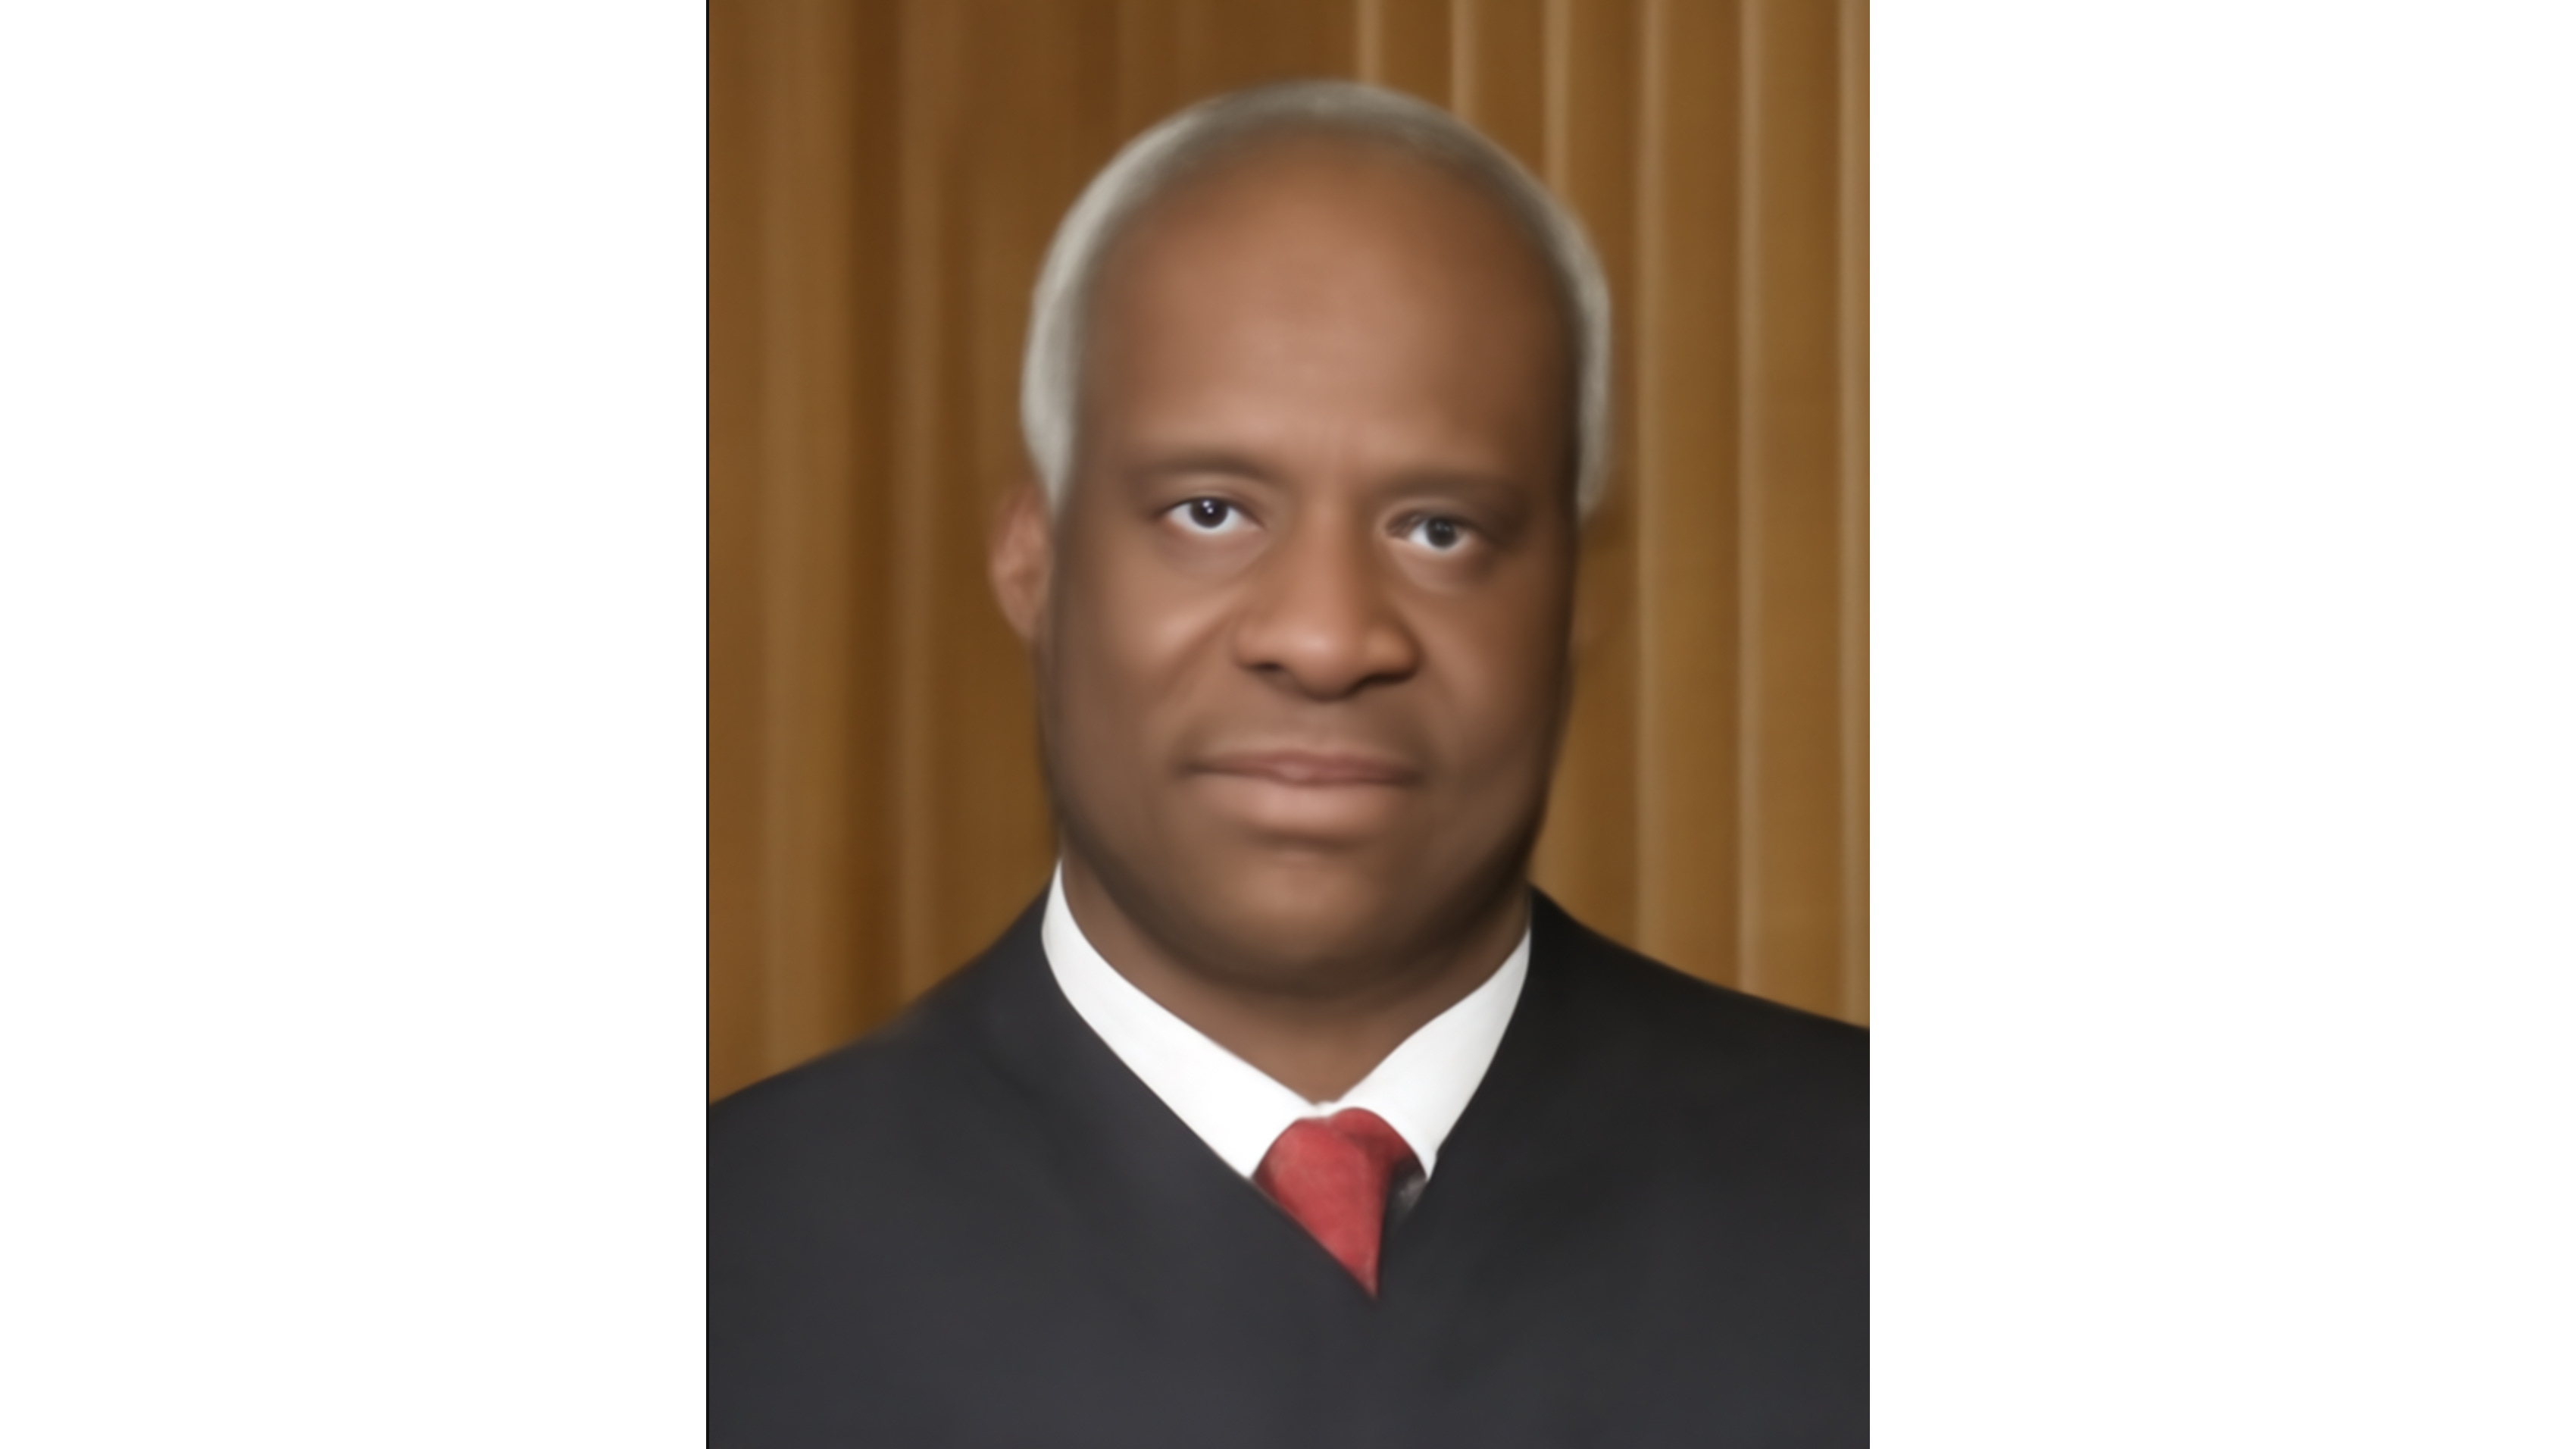 AI manipulated portrait of Clarence Thomas